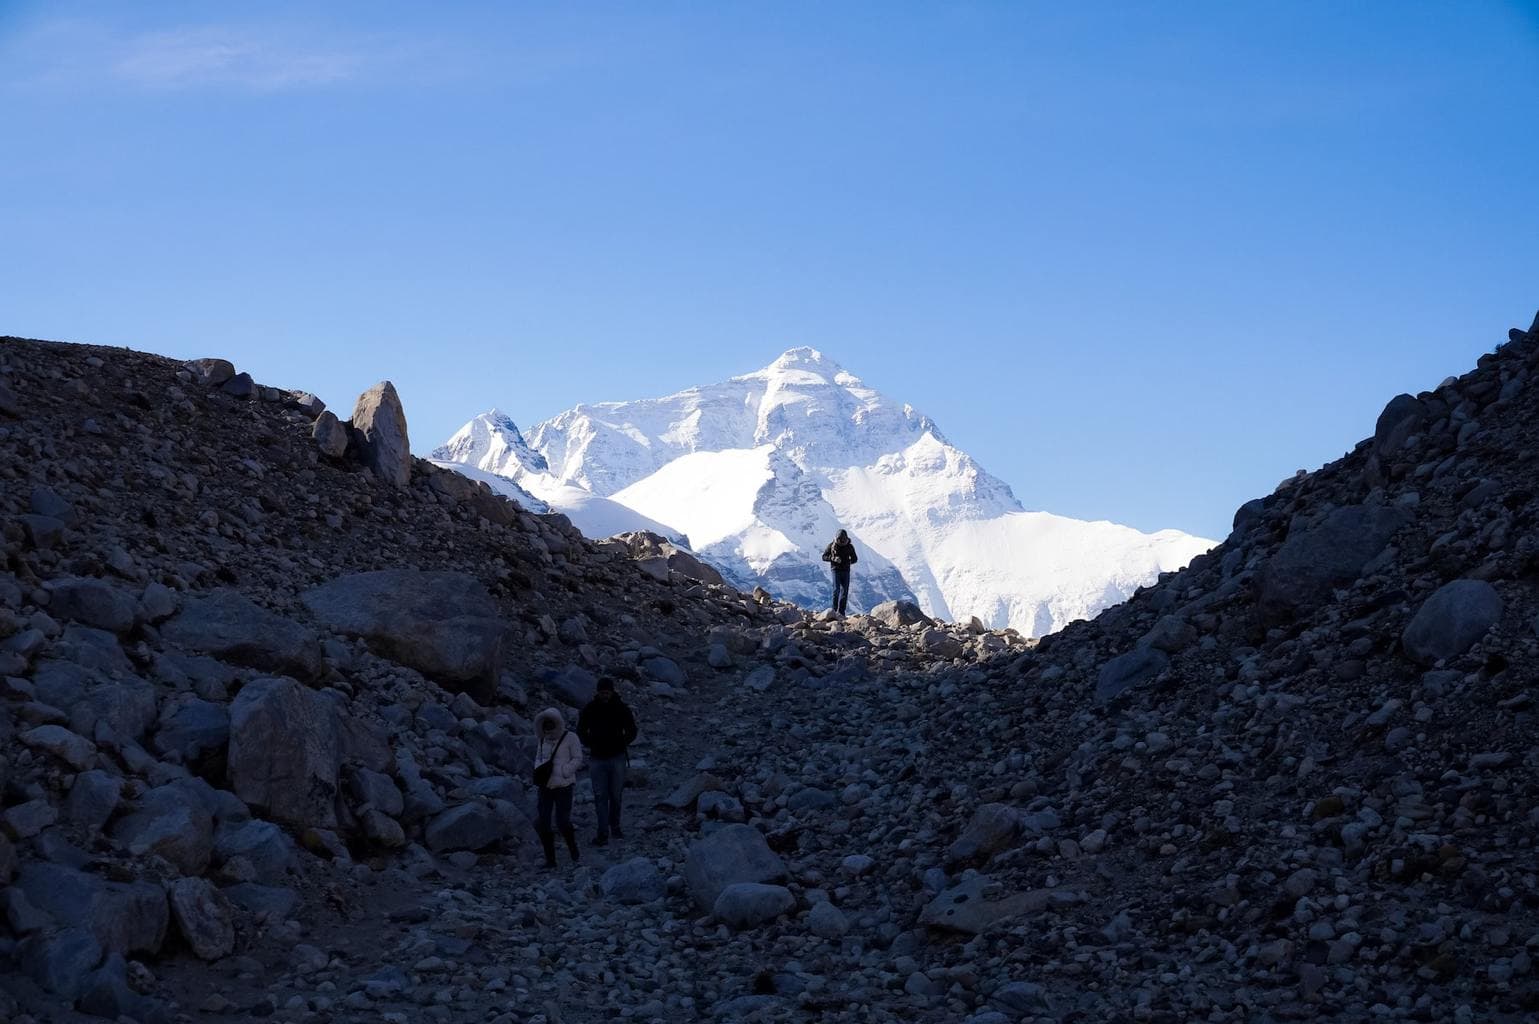 Climbing to Everest Base Camp